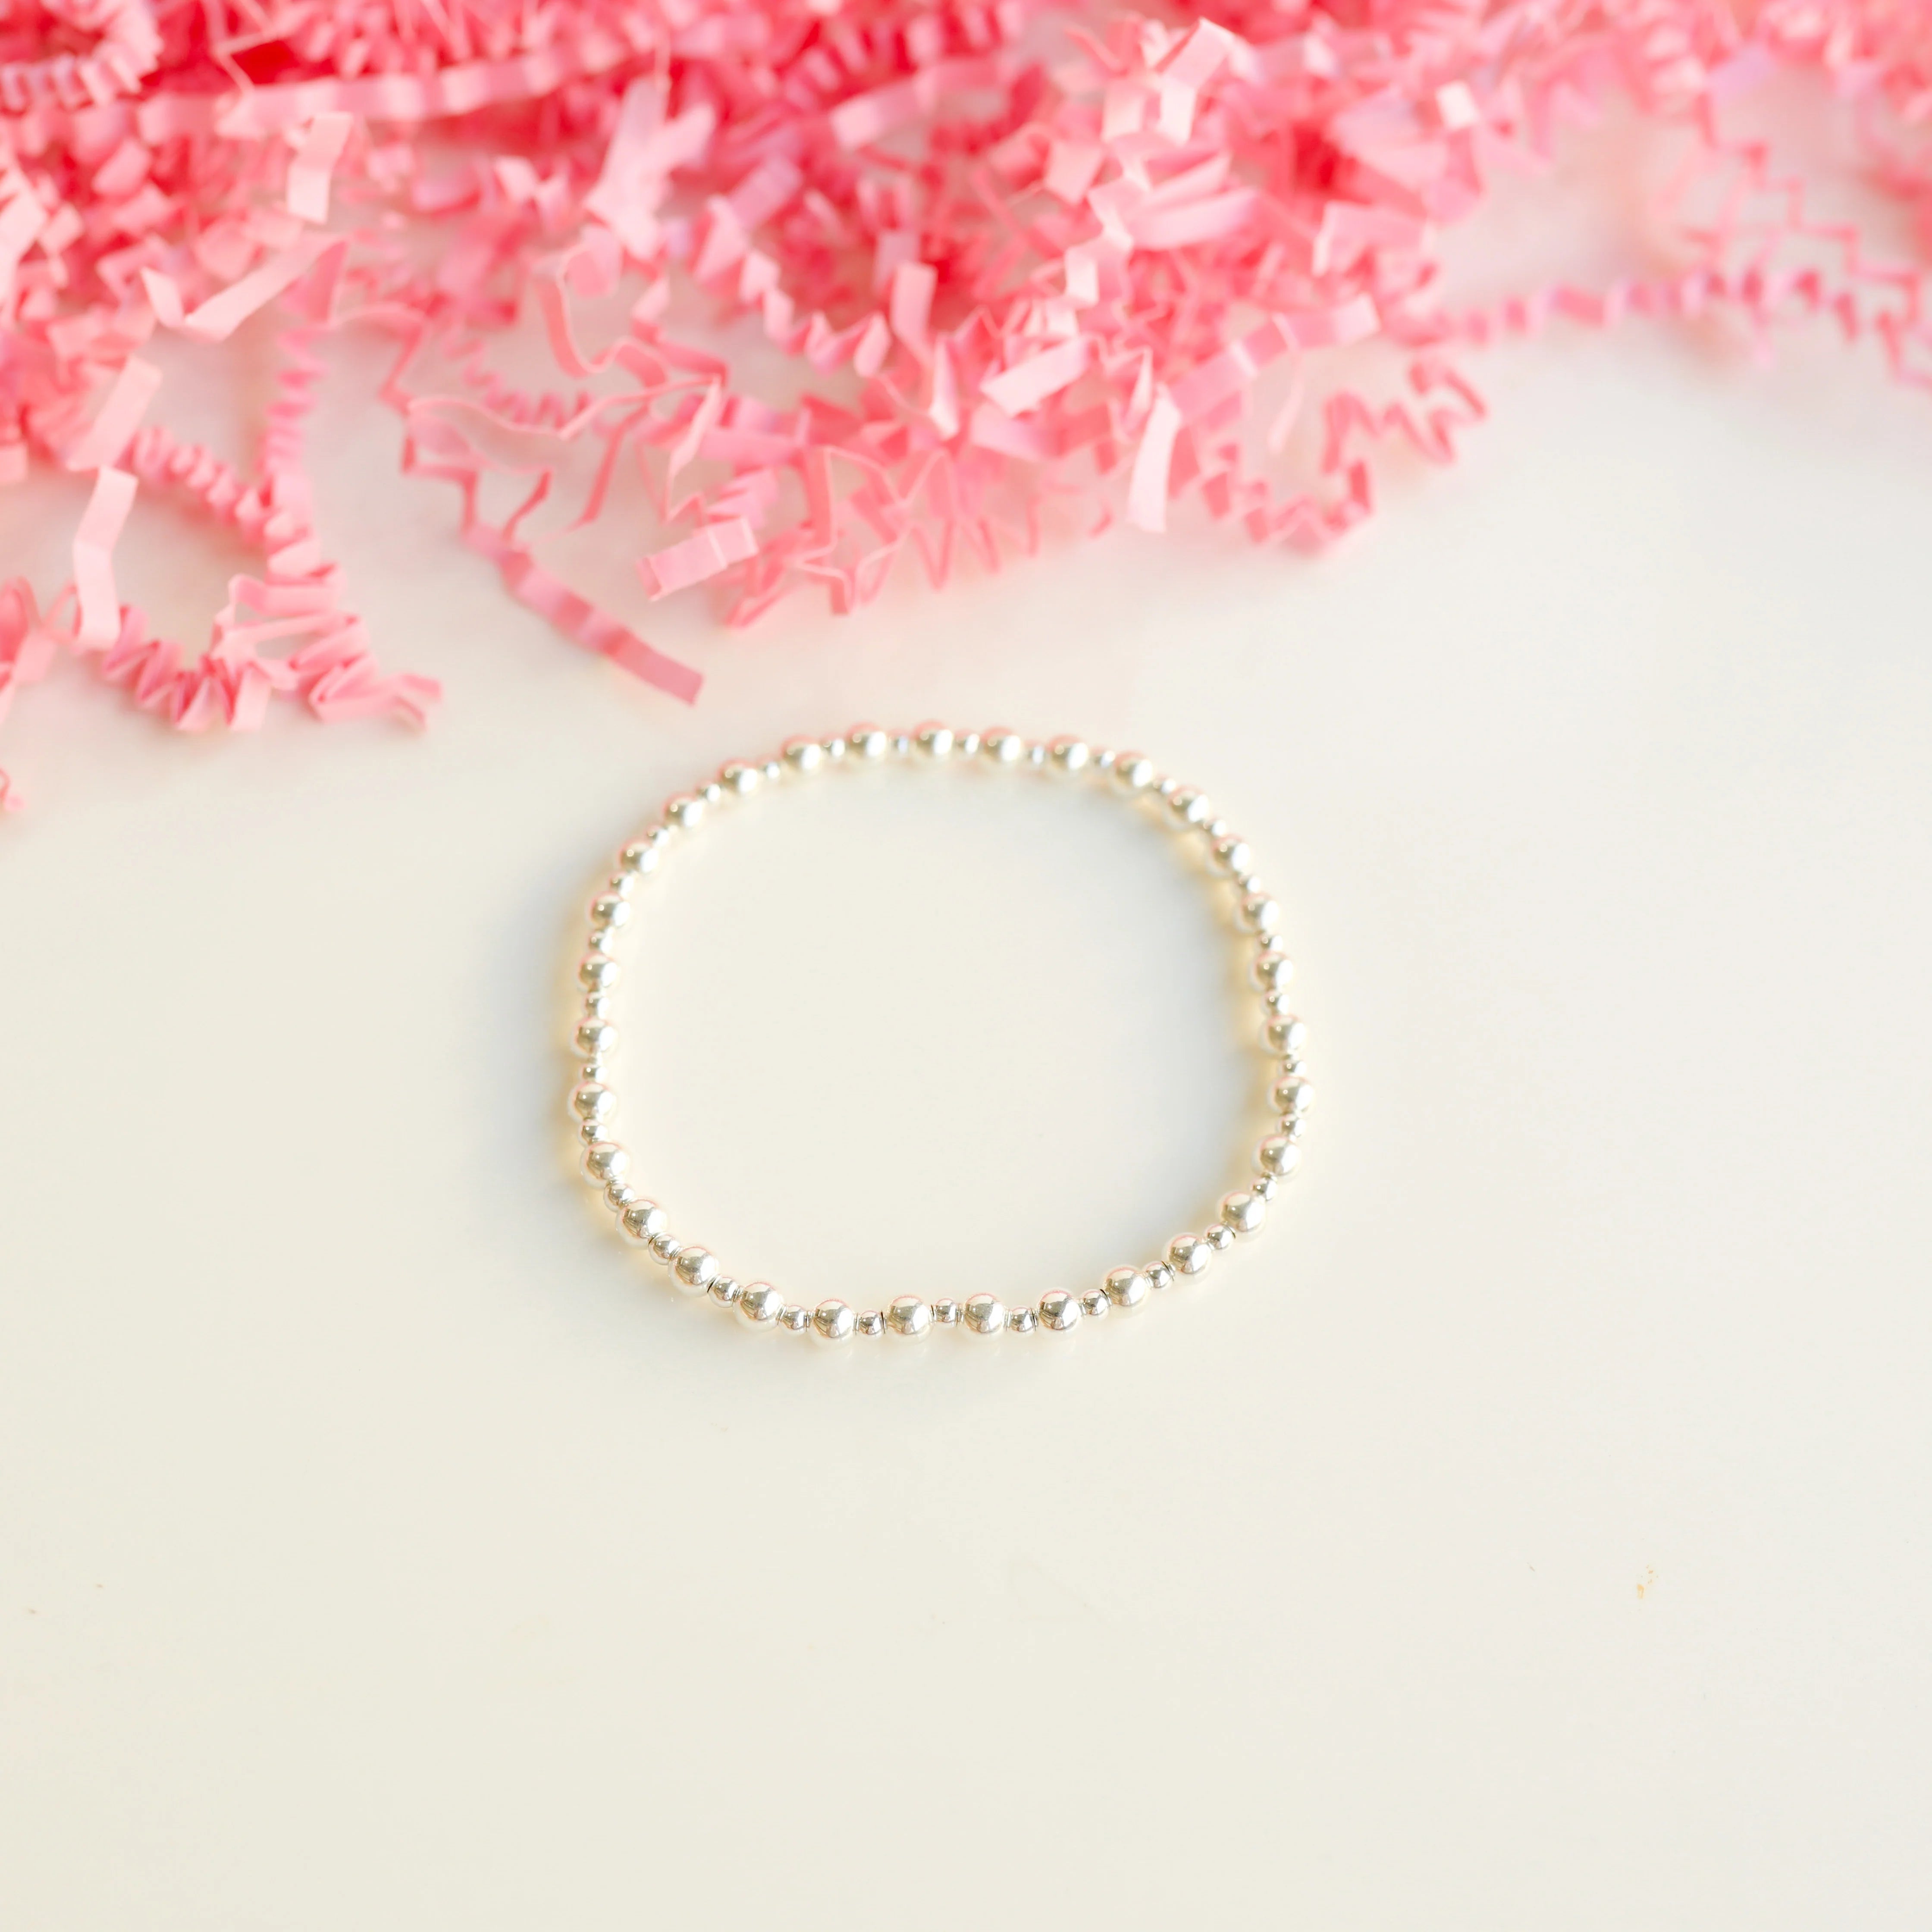 Beaded Blondes | Mini Katy Bracelet in Silver - Giddy Up Glamour Boutique